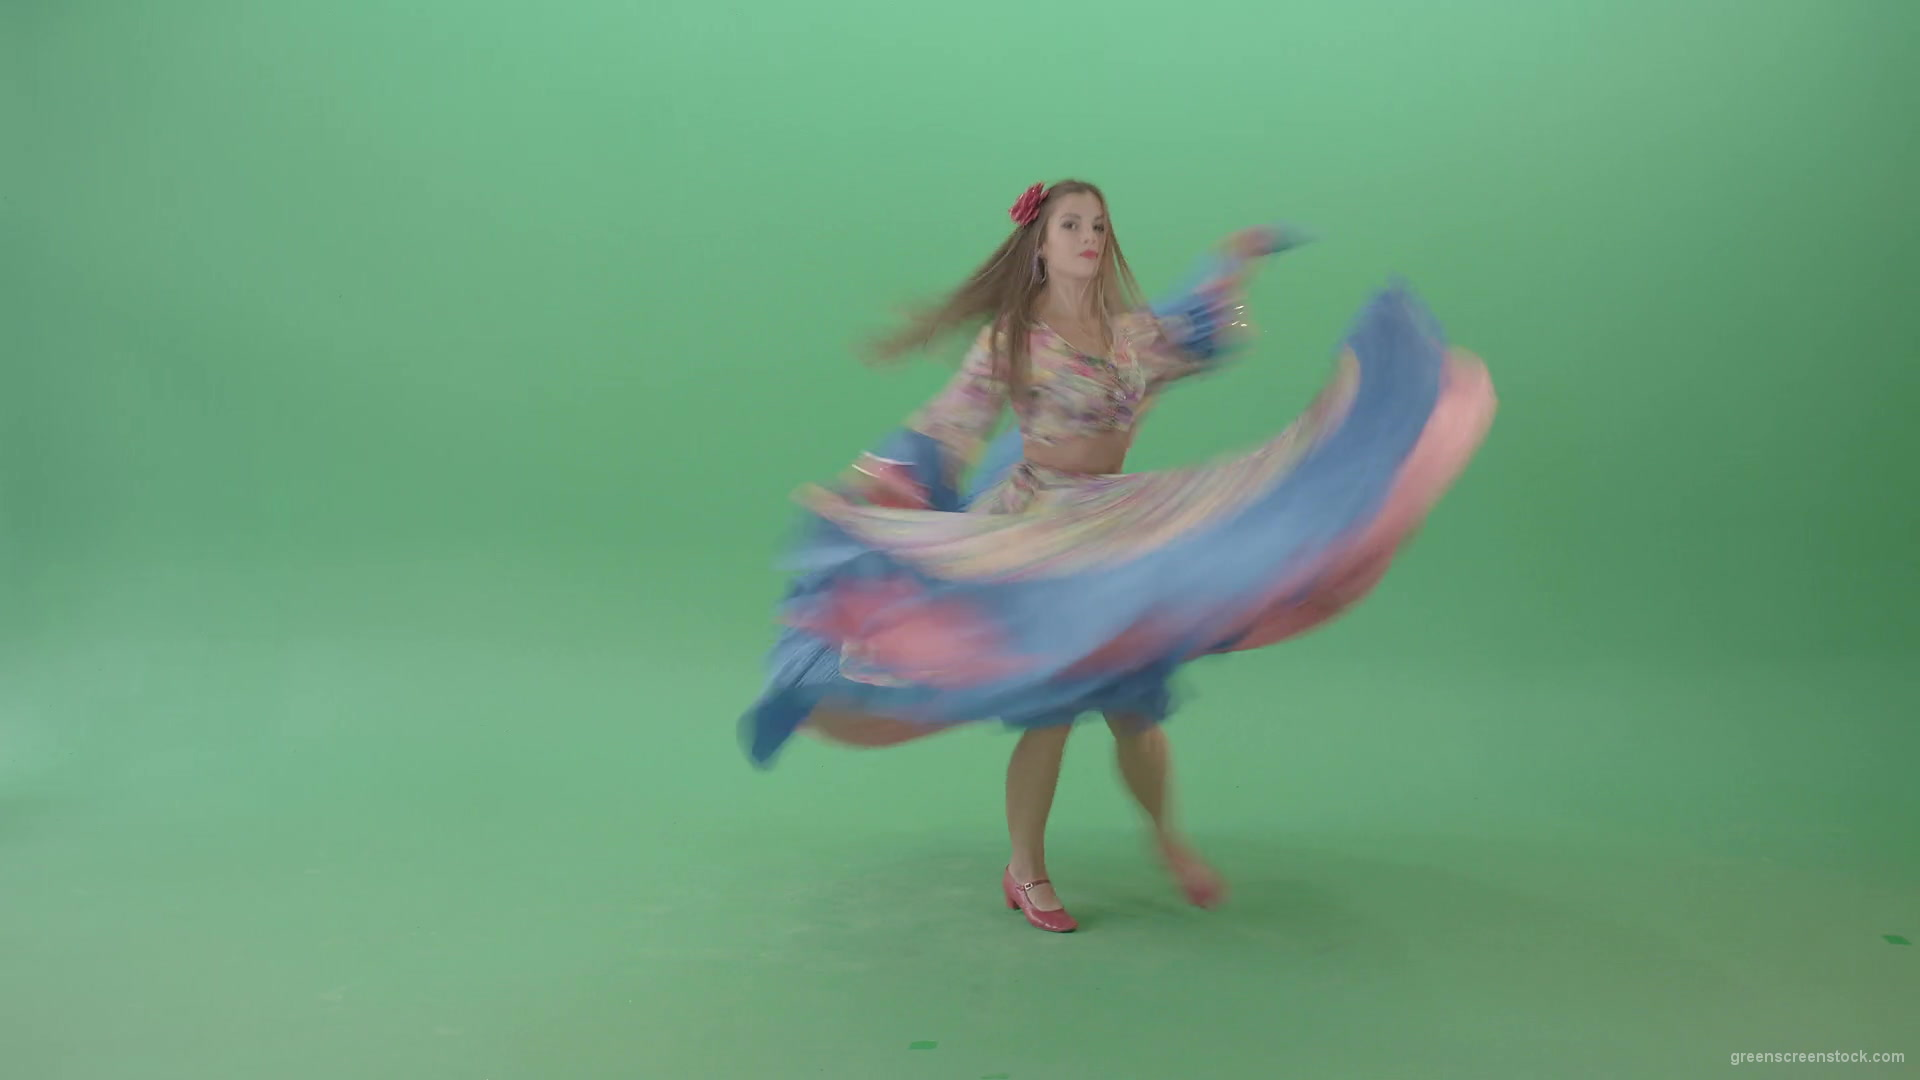 Roma-gipsy-woman-dancing-in-colorful-costume-isolated-on-Green-Screen-4K-Video-Footage-1920_007 Green Screen Stock